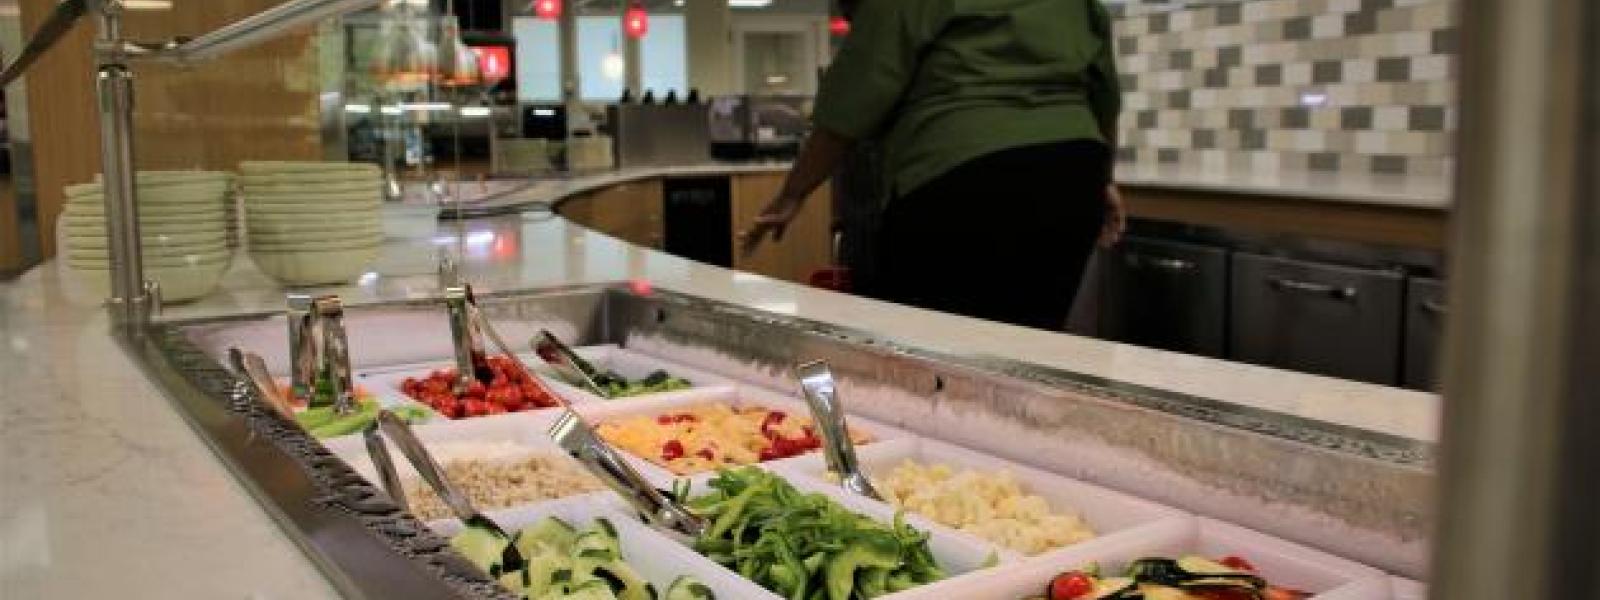 CIU's new dining center features diverse menu options in a beautiful new facility.